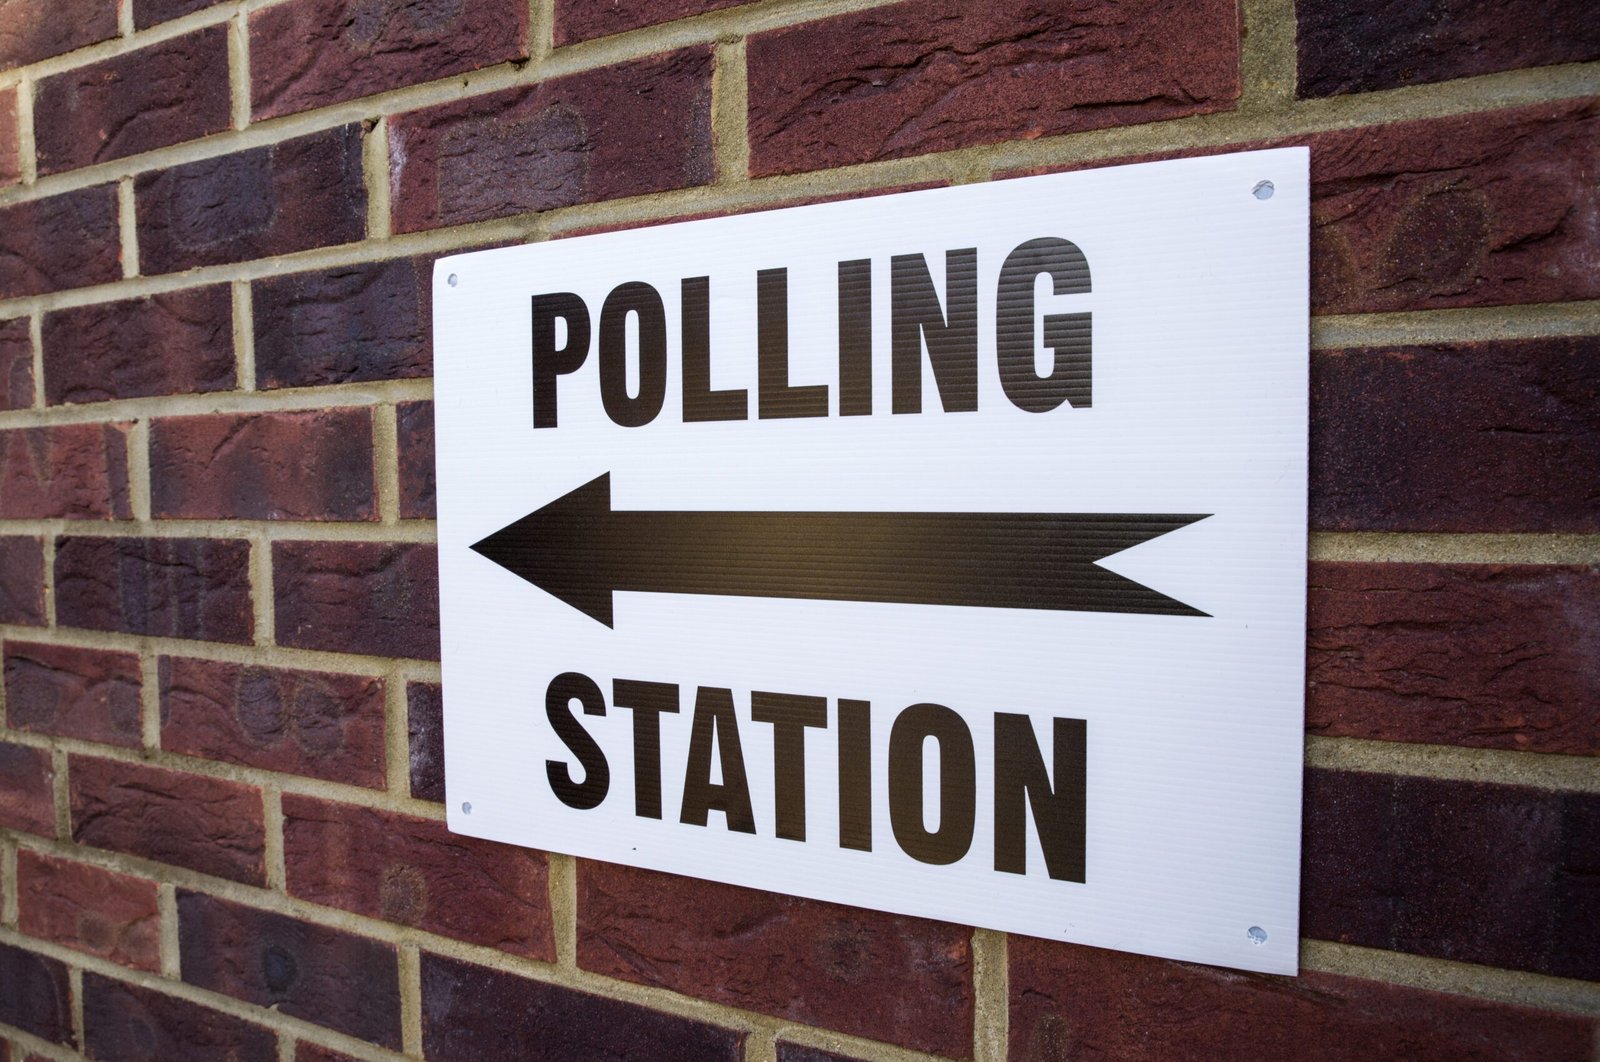 Polling Station sign on brick wall